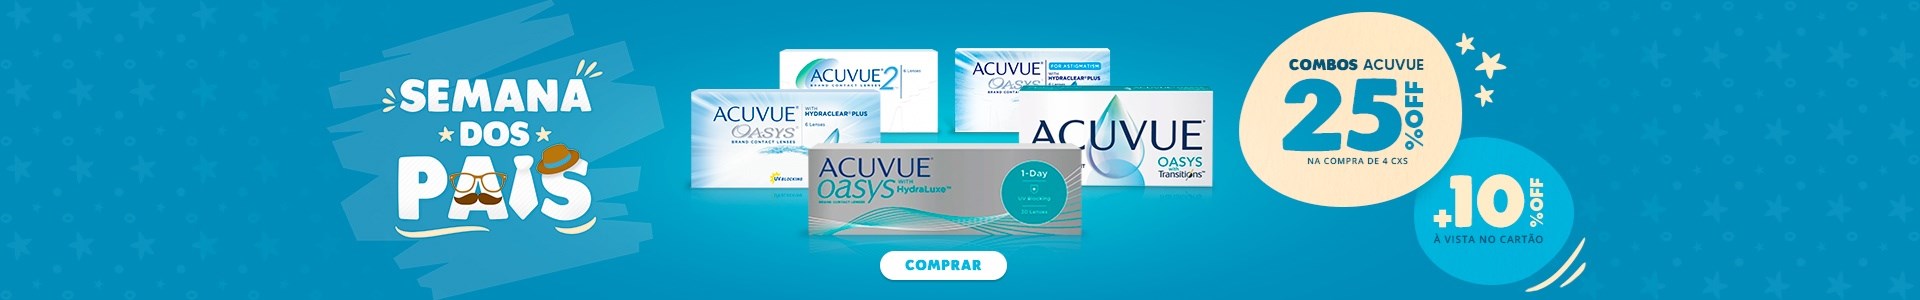 Combos ACUVUE com 25%OFF